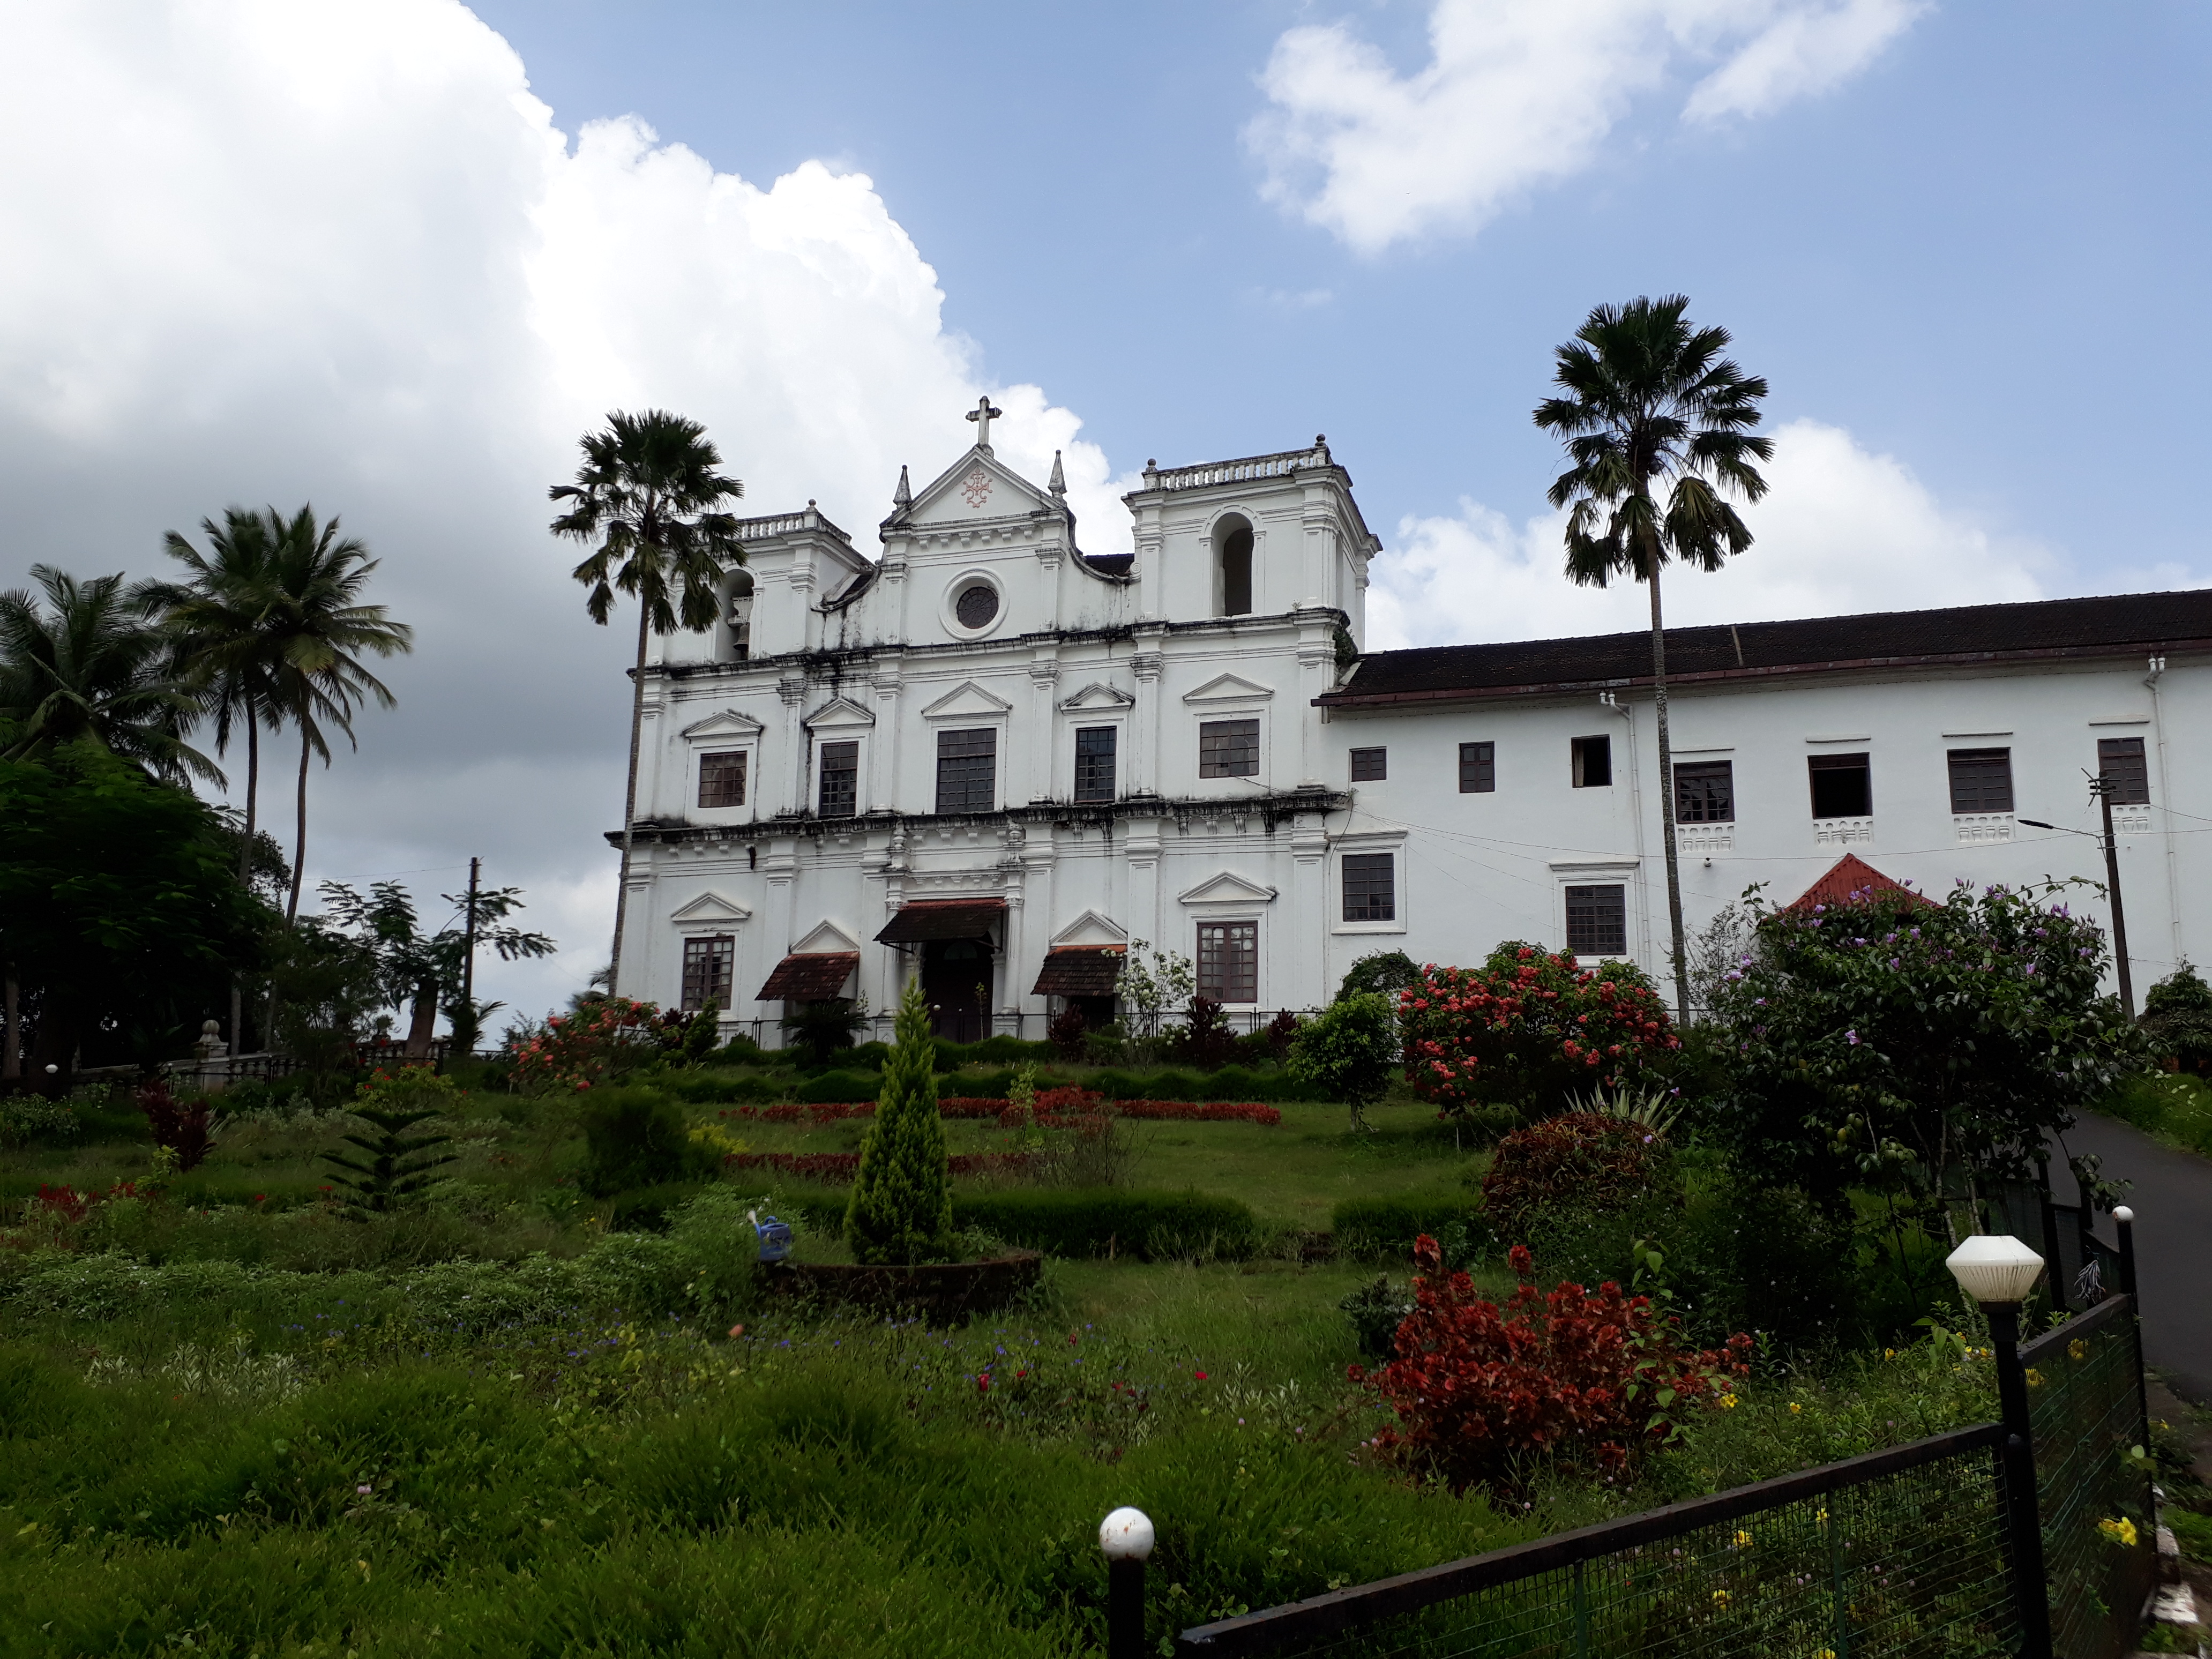 Seminary at Rachol, Goa on a hill overlooking the gardens